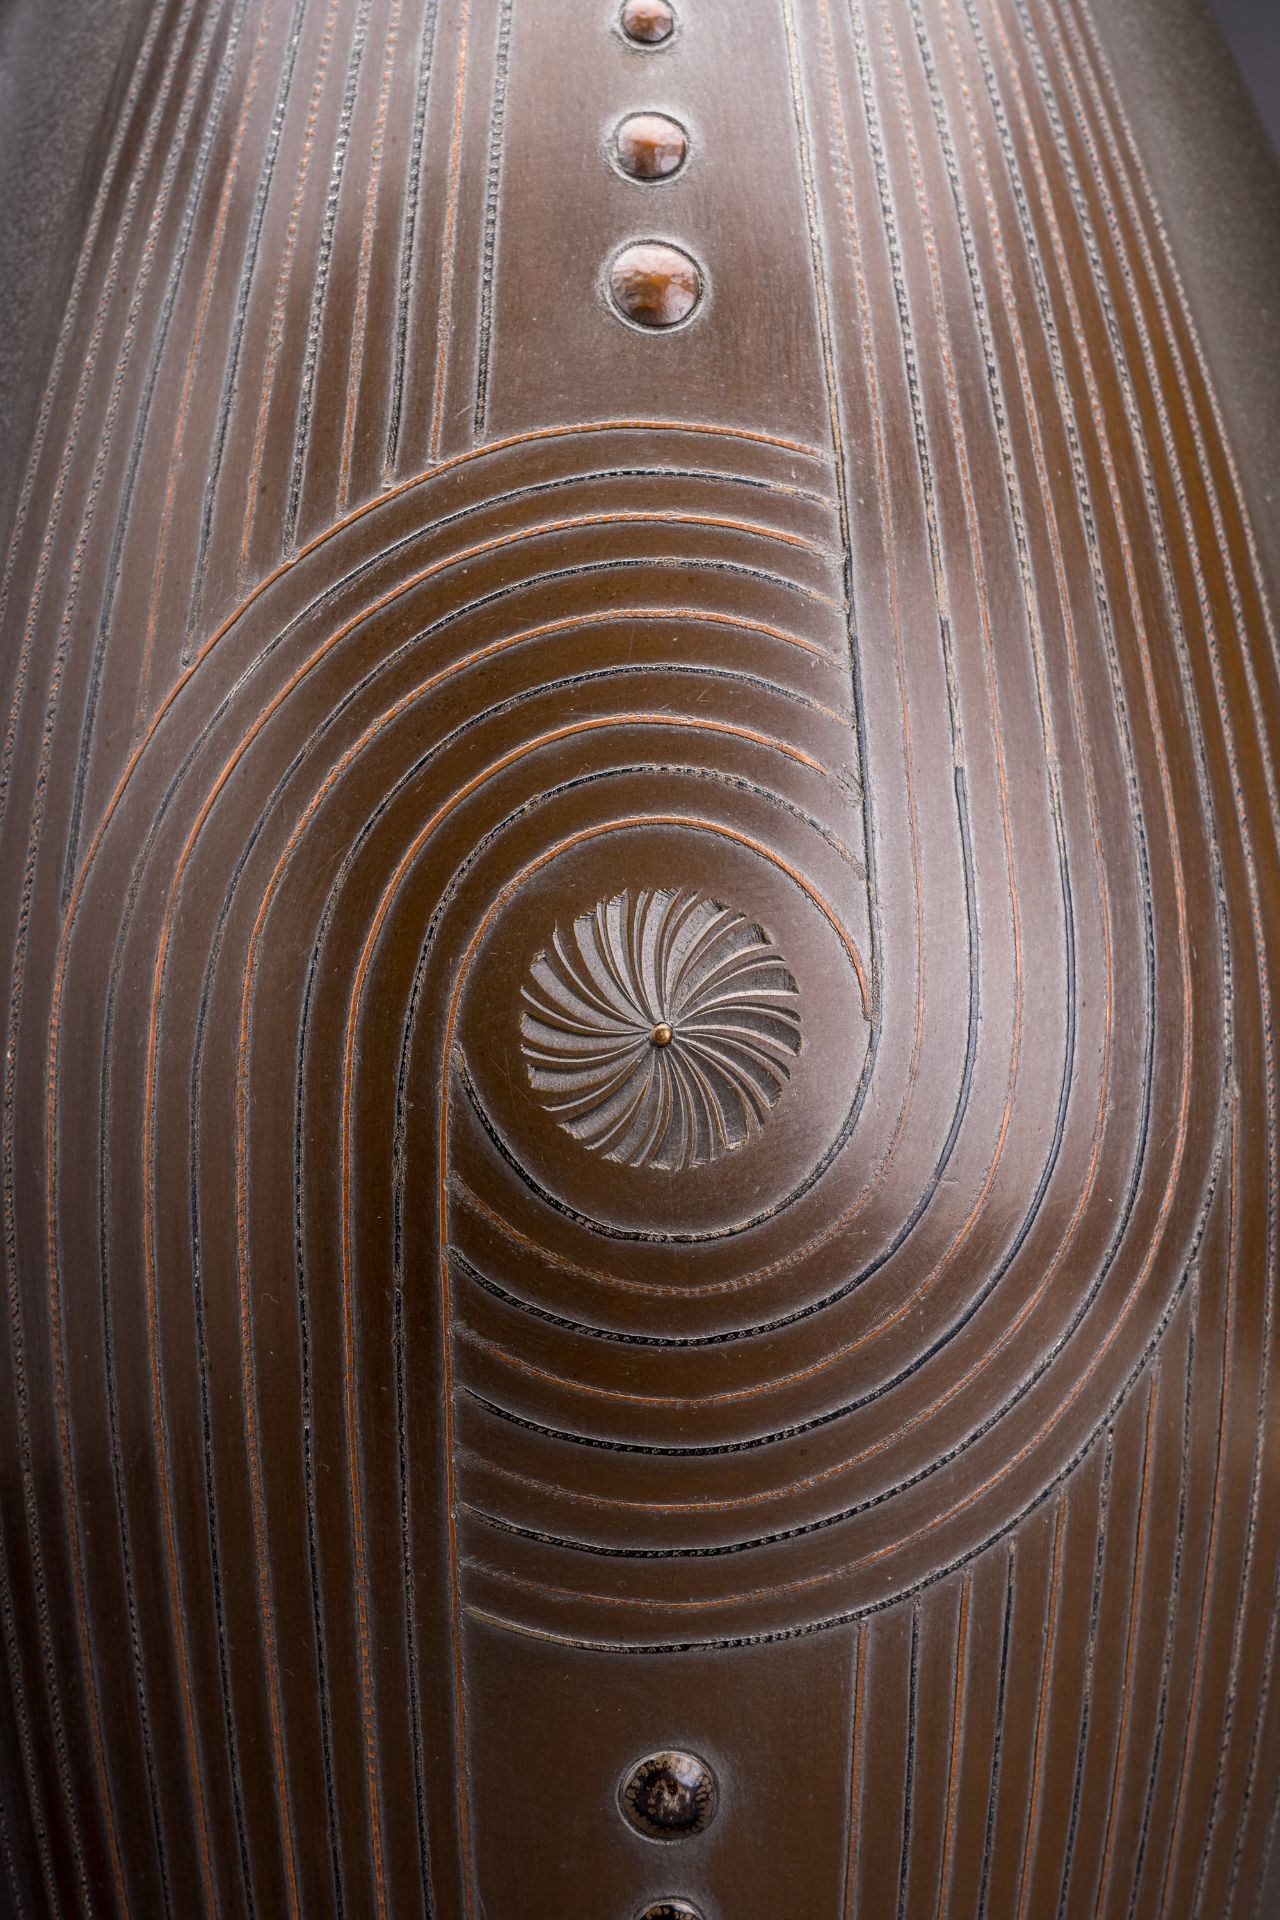 A SILVER AND BRONZE PATINATED VASE, BY ARISU BIZAN (BORN 1937) - Image 3 of 10